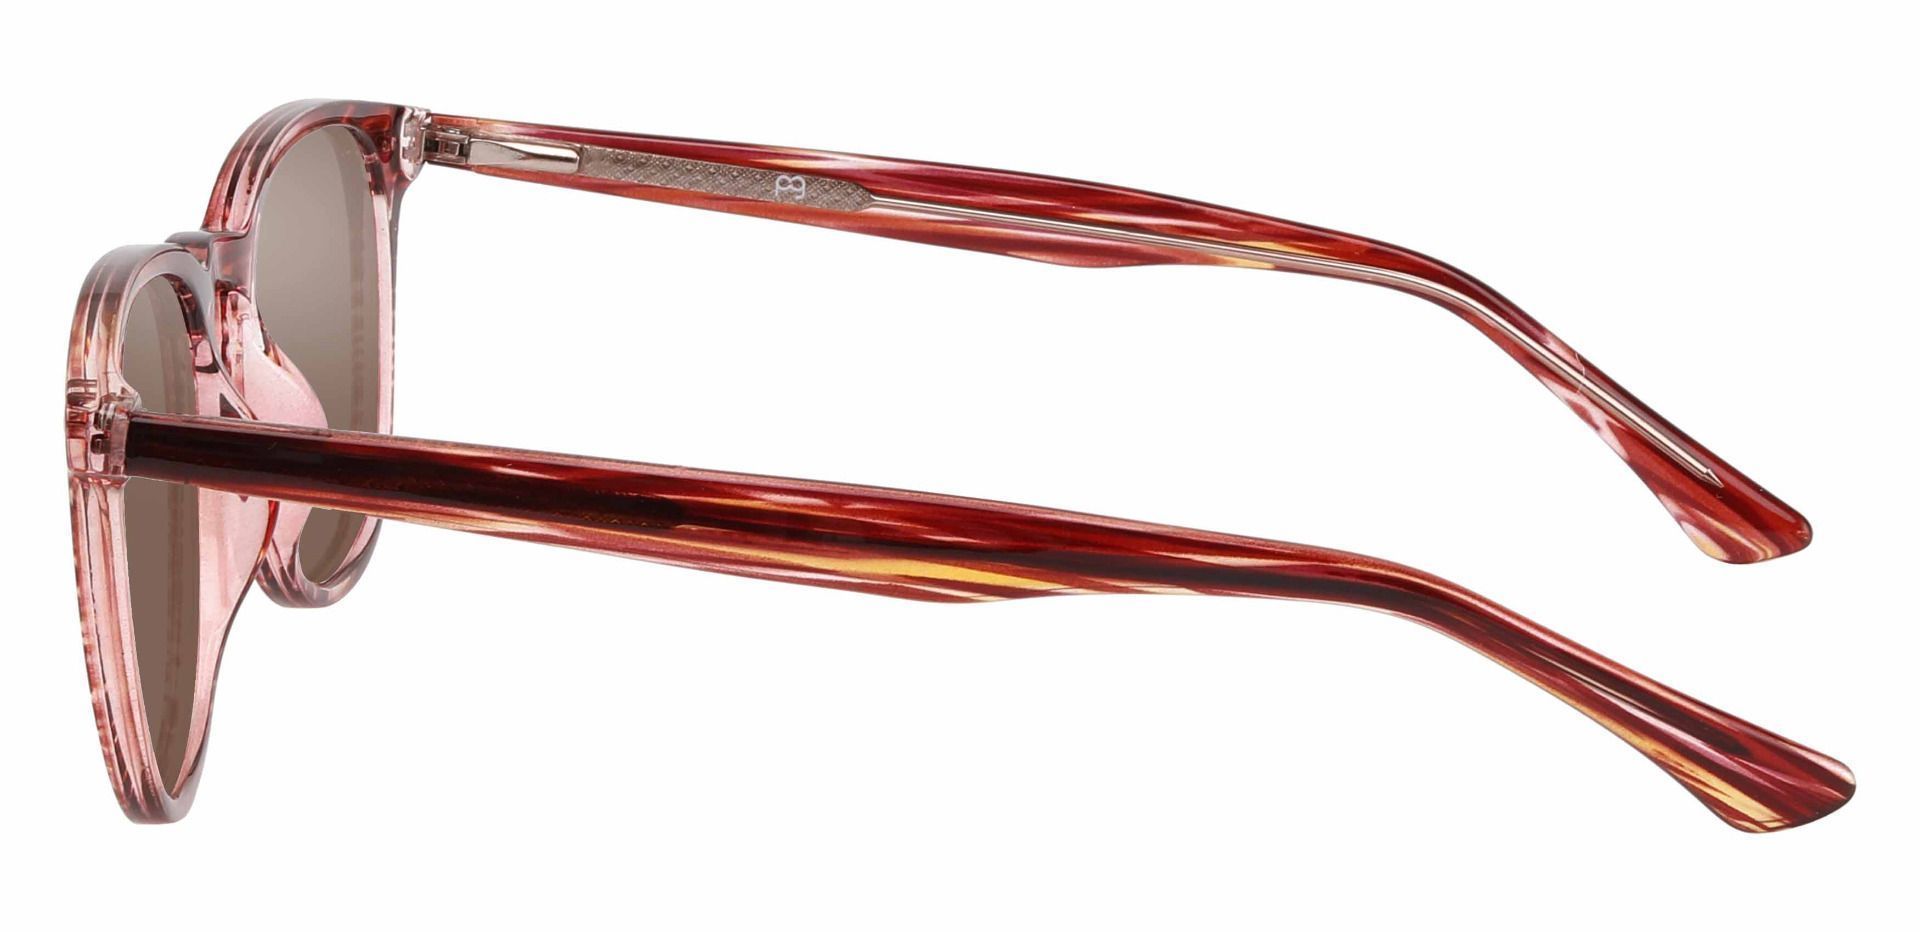 Sycamore Oval Non-Rx Sunglasses - Red Frame With Brown Lenses